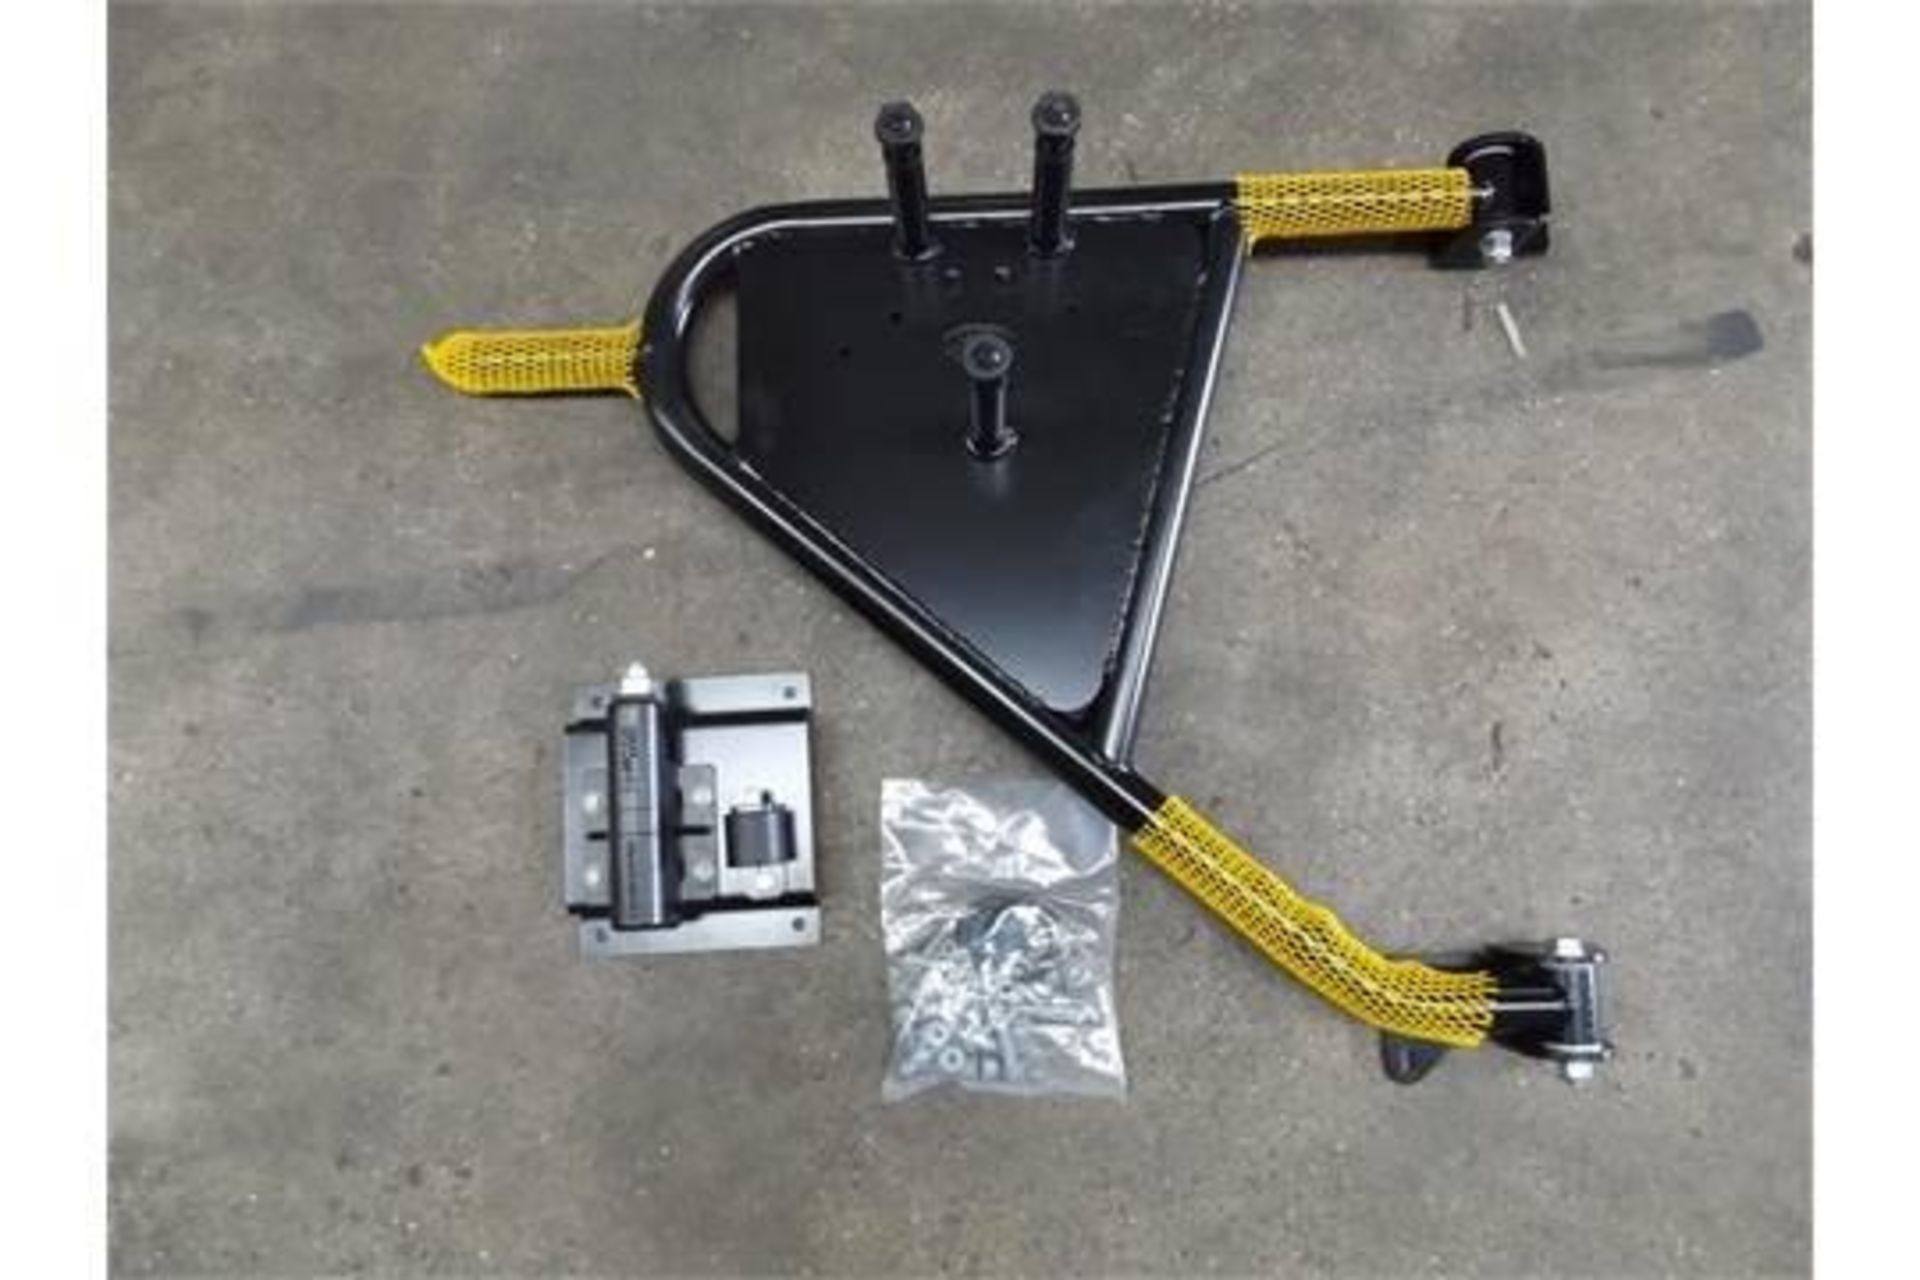 10 x Land Rover Defender Swing Out Spare Wheel Carrier Kits P/No VPLDR0129 - Image 2 of 10